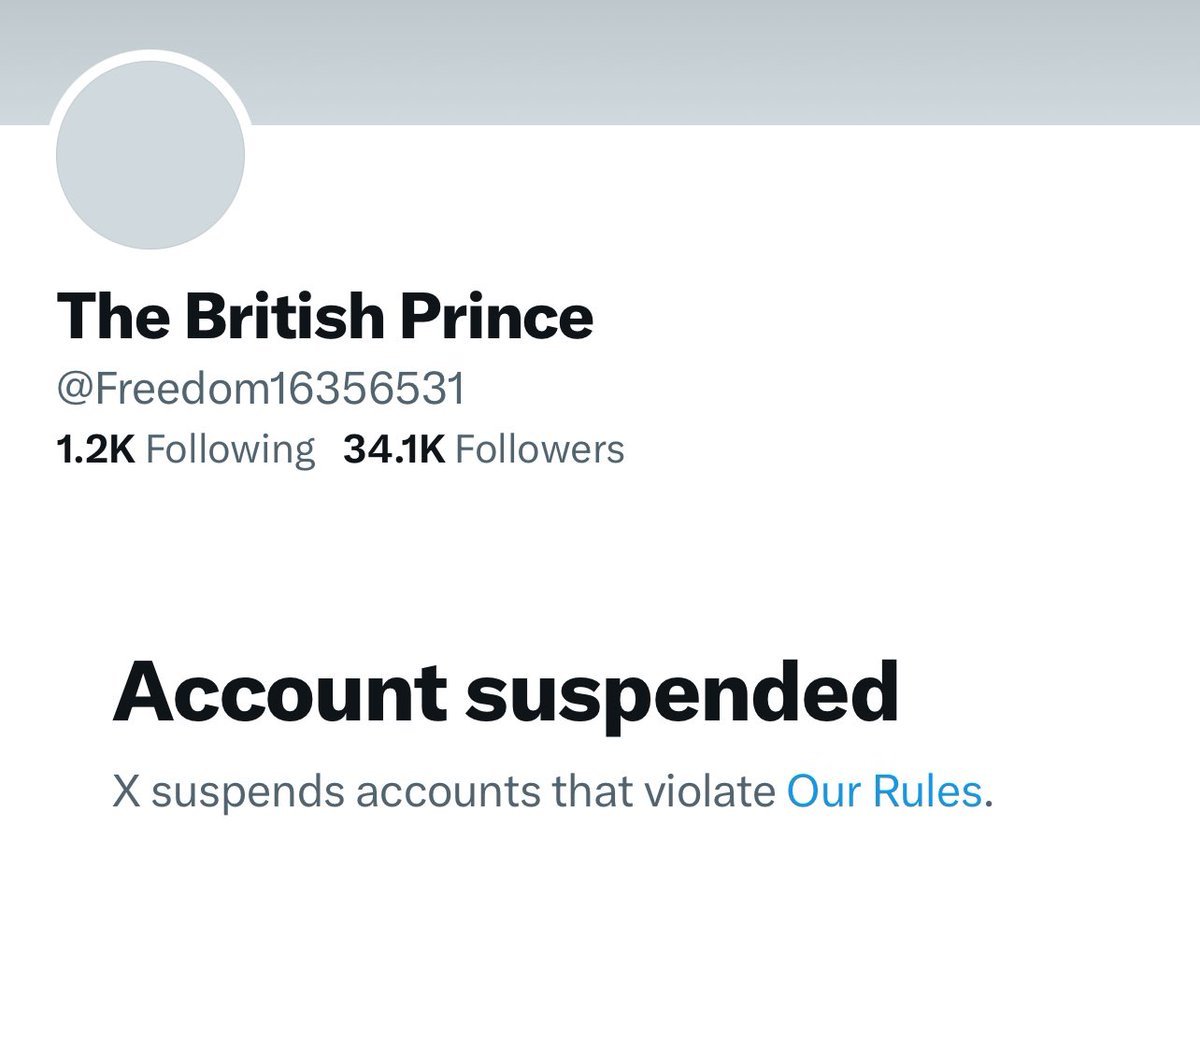 Hey @elonmusk, what gives? why was The British Prince @Freedom16356531 suspended? I have NEVER seen this account sharing anything besides balanced opinions. Fix this!